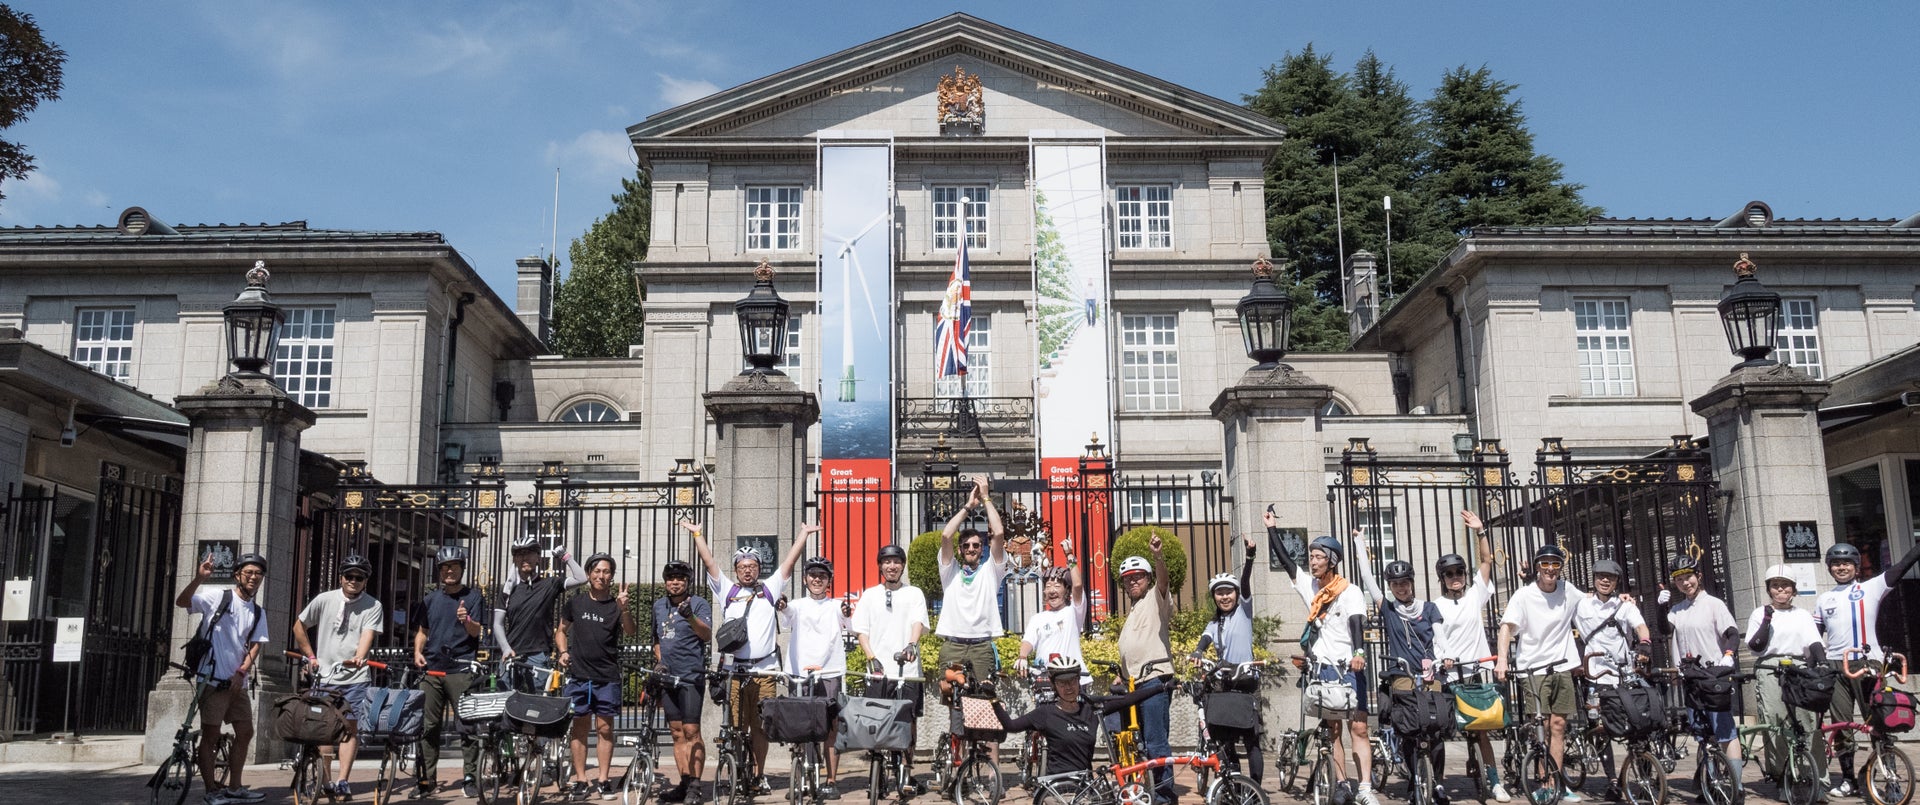 The Japanese Brompton community posing in front of the British Embassy in Tokyo, Japan